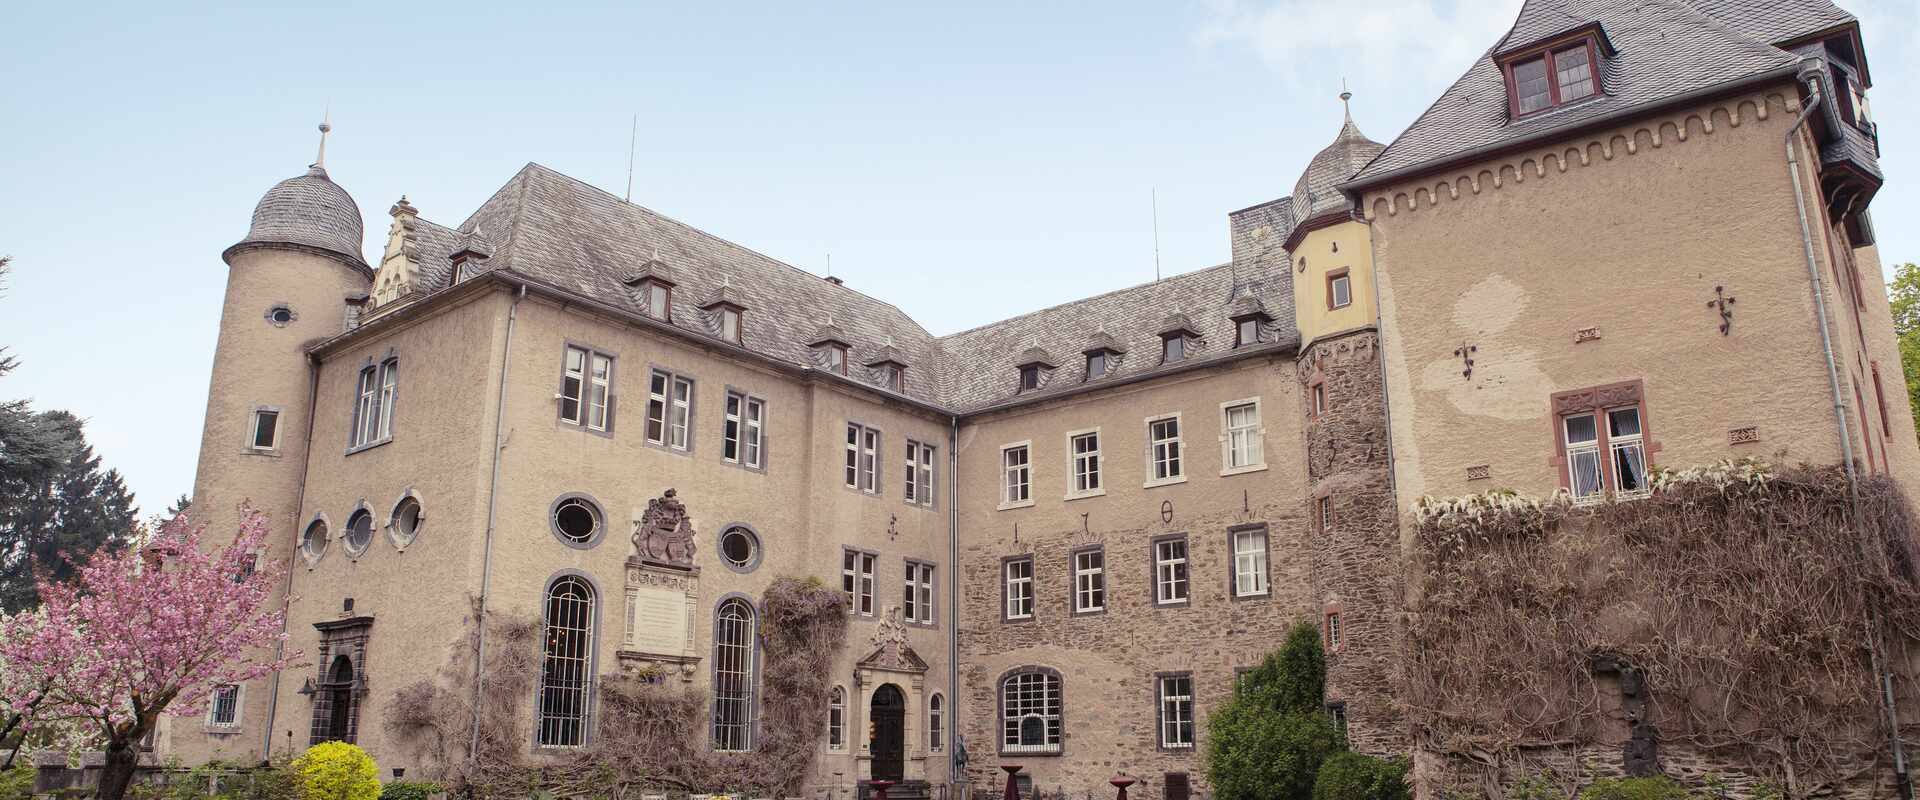 Namedy Castle exterior in Andernach, Germany